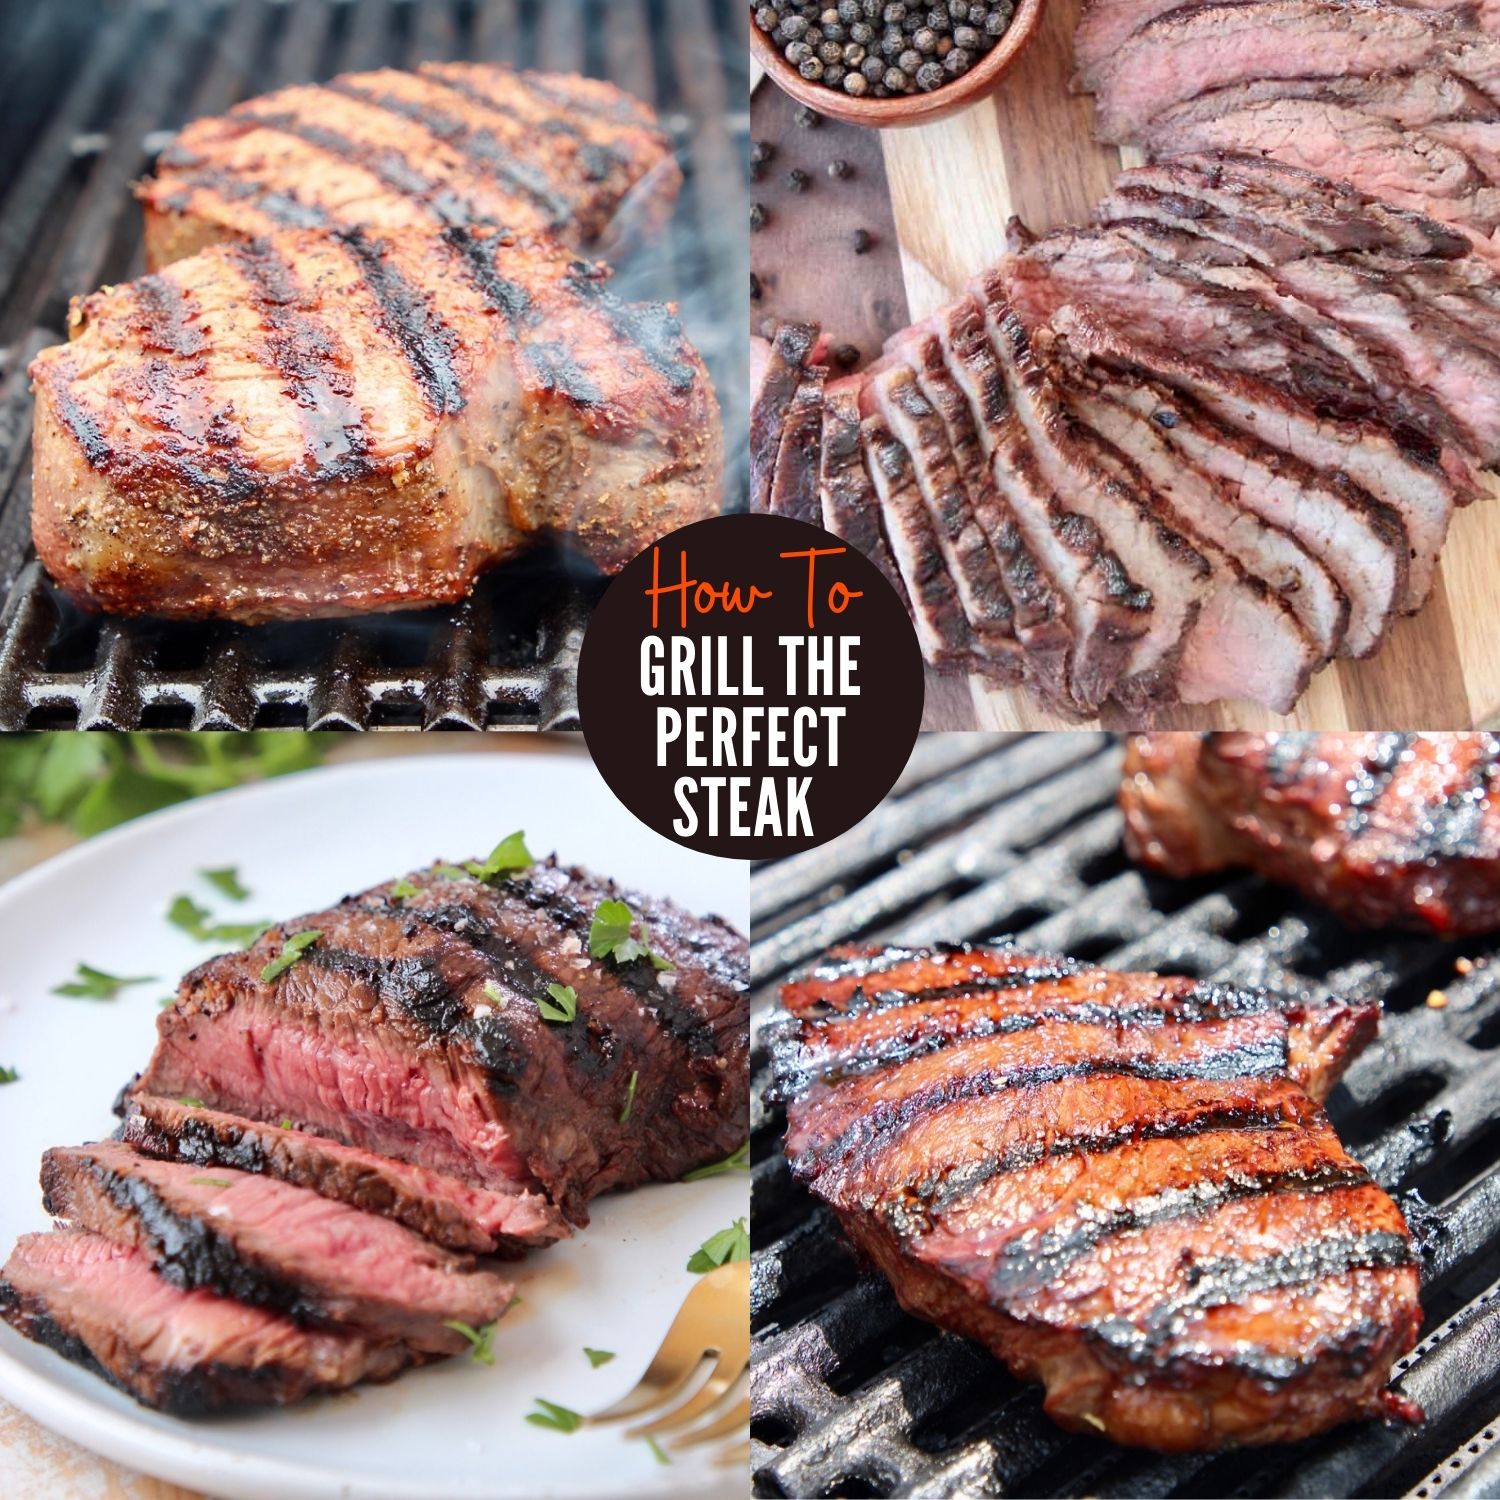 https://whitneybond.com/wp-content/uploads/2021/06/how-to-grill-steak-1-1.jpg